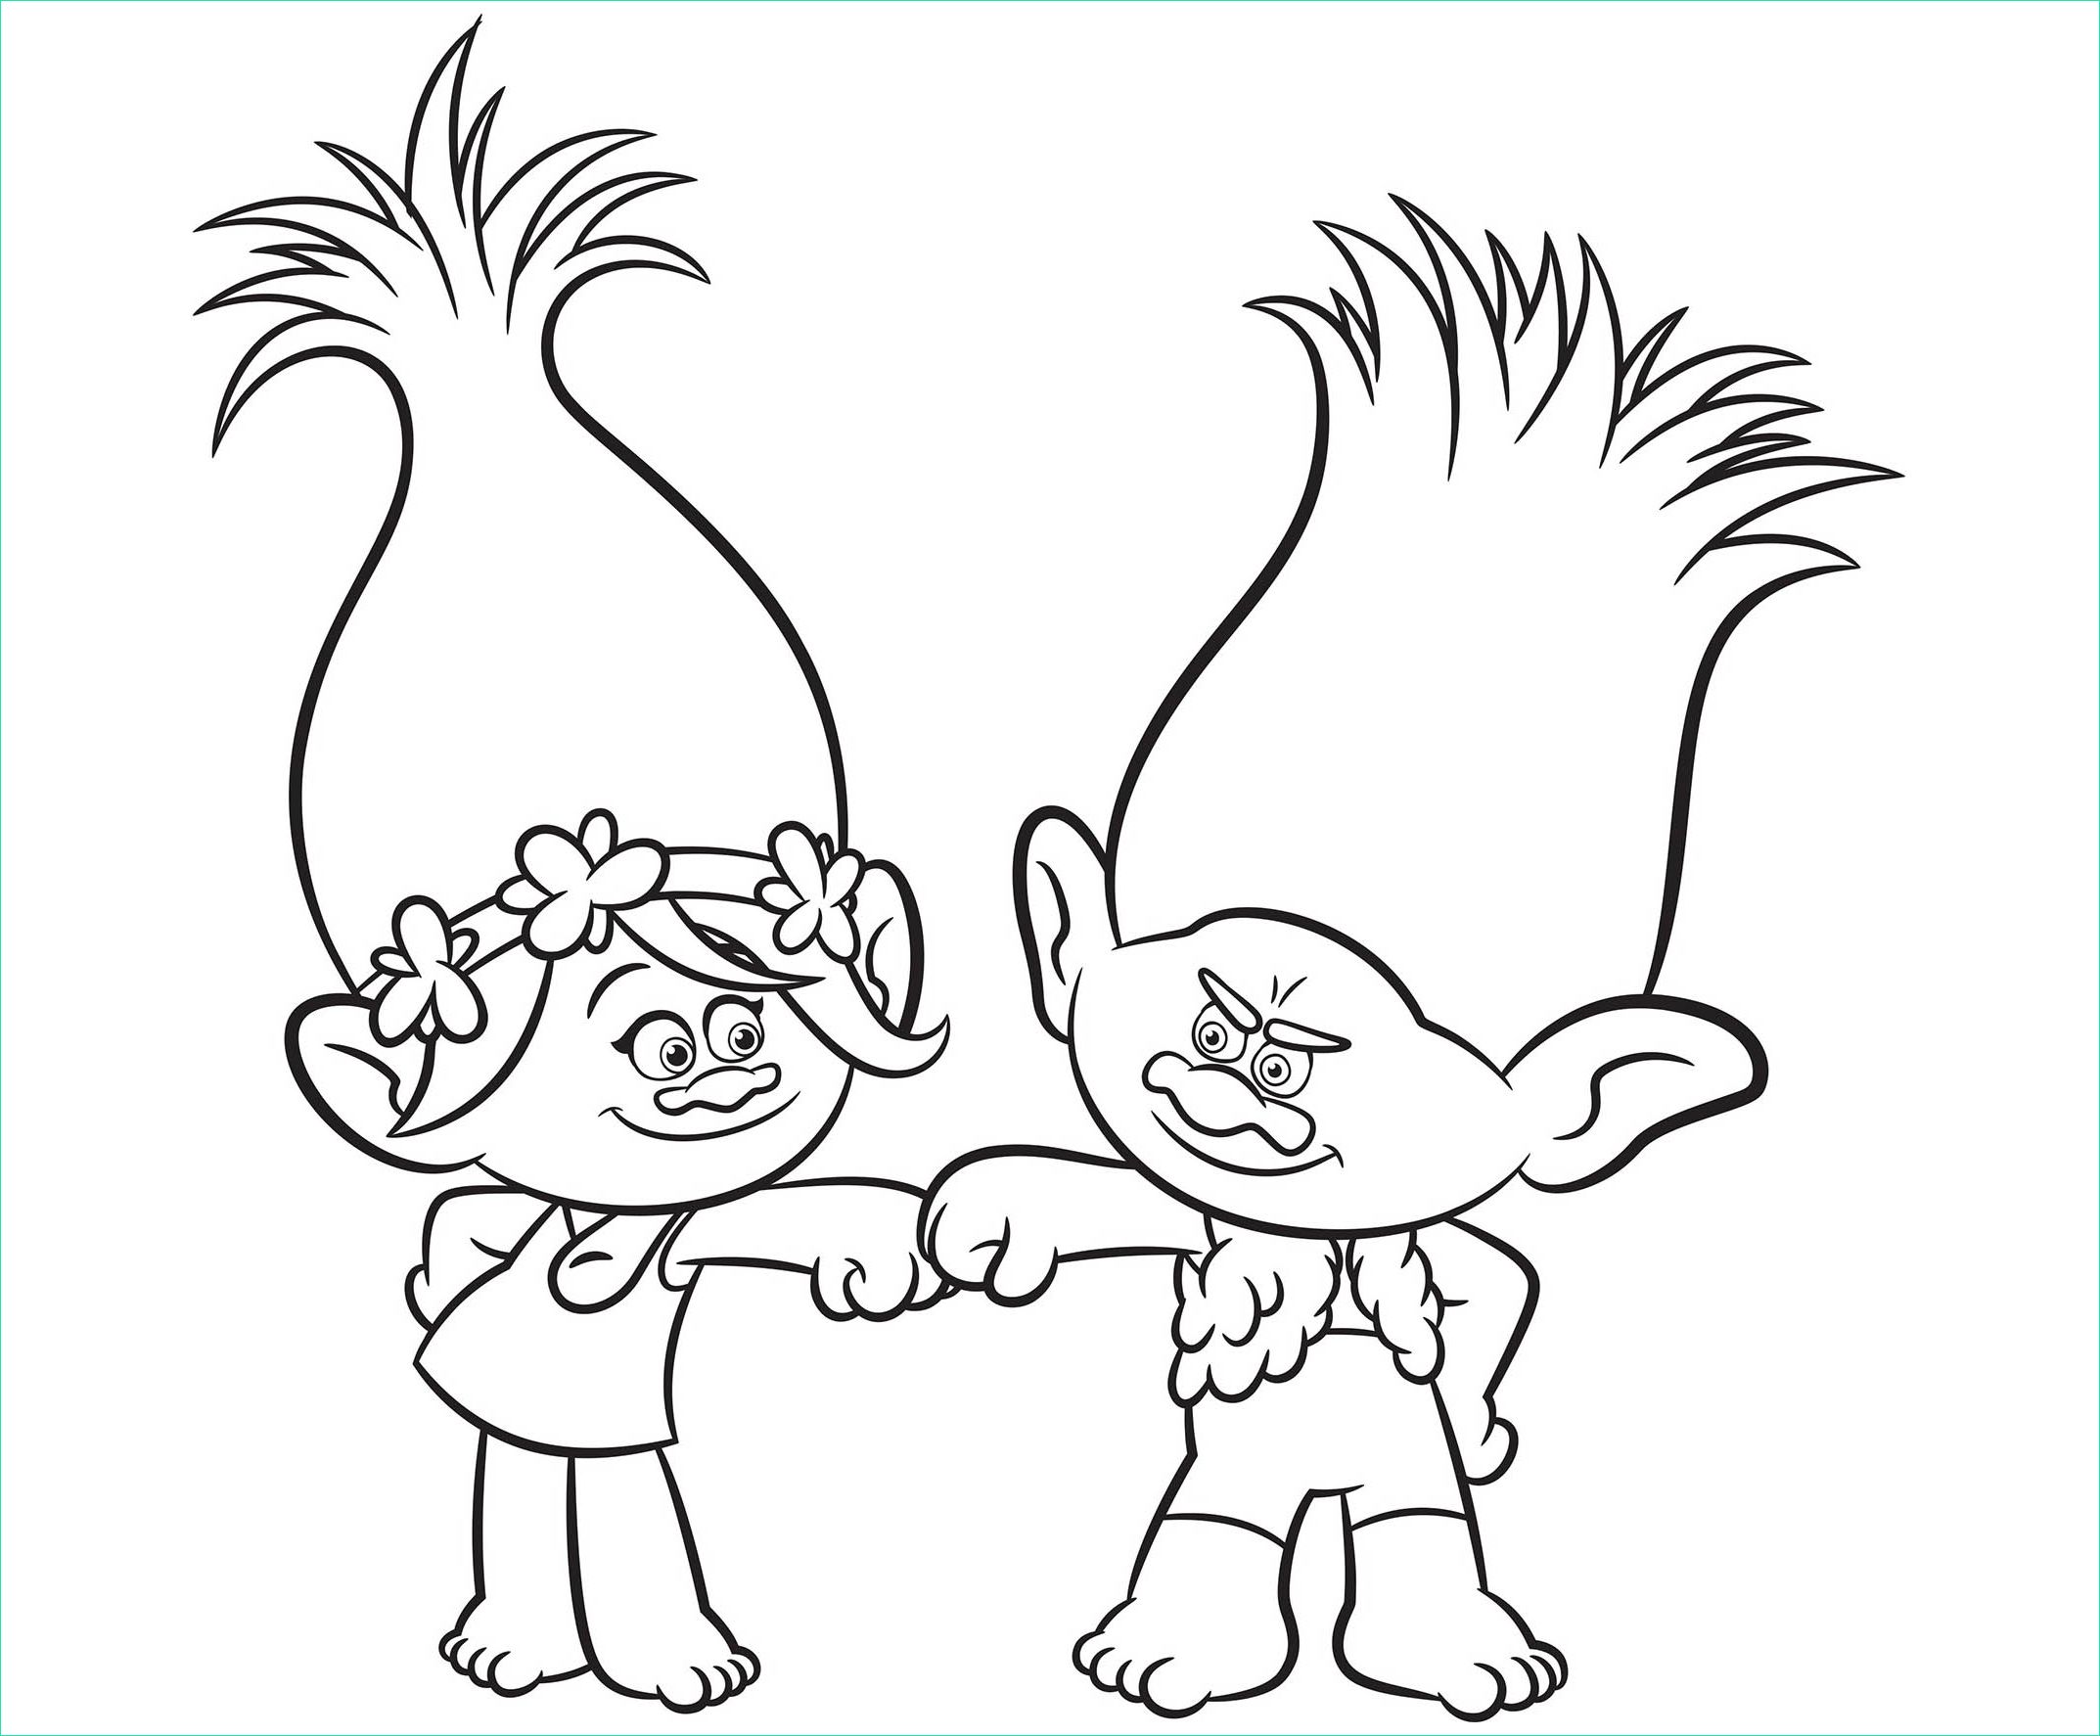 Dessin Des Trolls Beau Photos Trolls to for Free Trolls Kids Coloring Pages